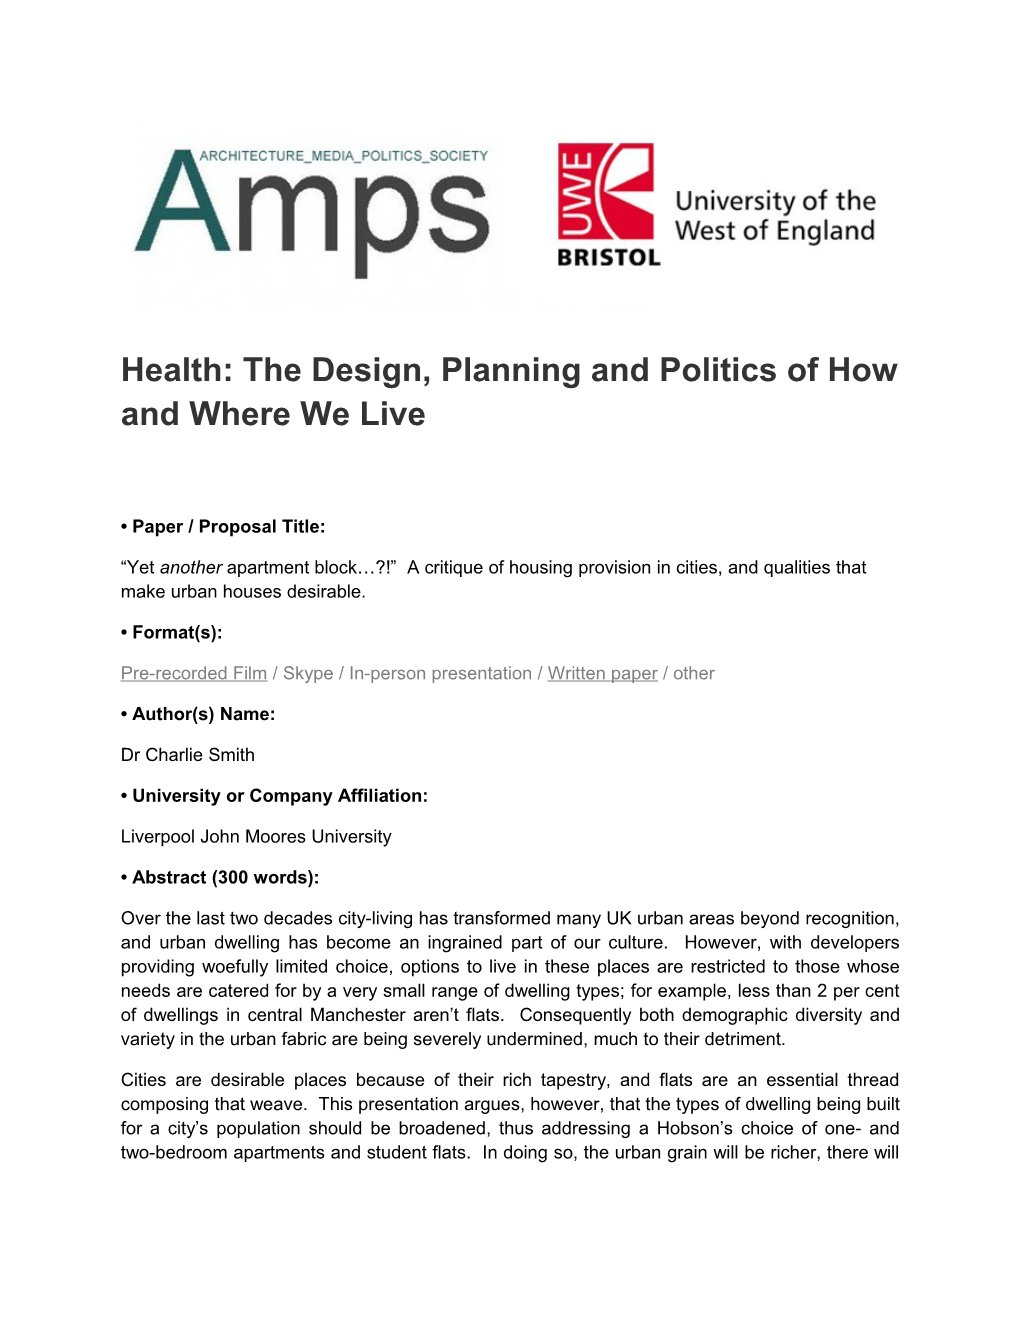 Health: the Design, Planning and Politics of How and Where We Live